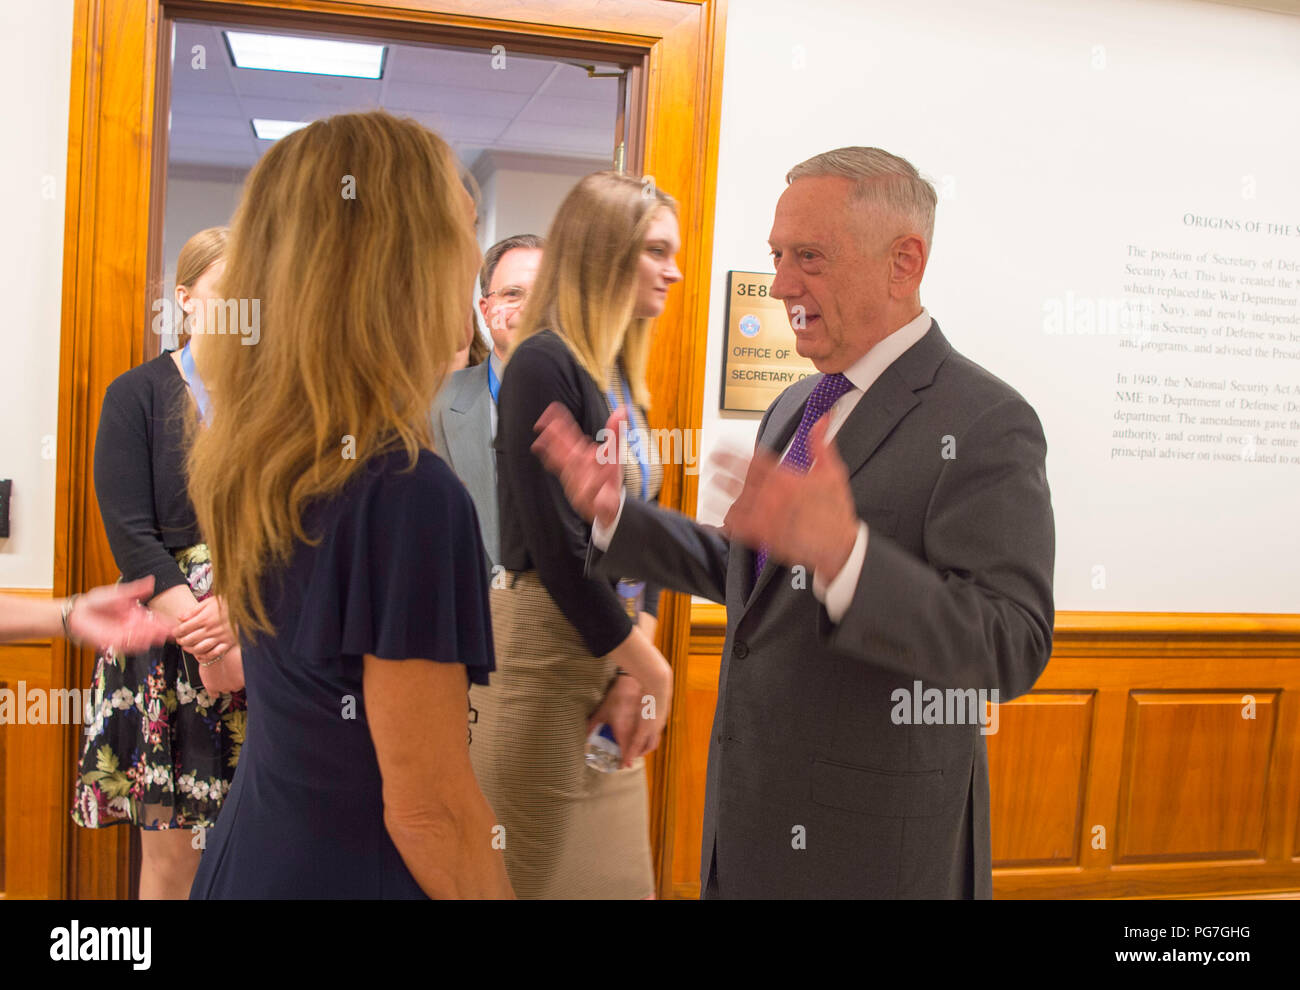 U.S. Secretary of Defense James N. Mattis meets with the family of Medal of Honor recipient, Air Force Tech. Sgt. John A. Chapman at the Pentagon, Wash. DC., Aug. 23, 2018. (DoD photo by Air Force Master Sgt. Angelita Lawrence) Stock Photo